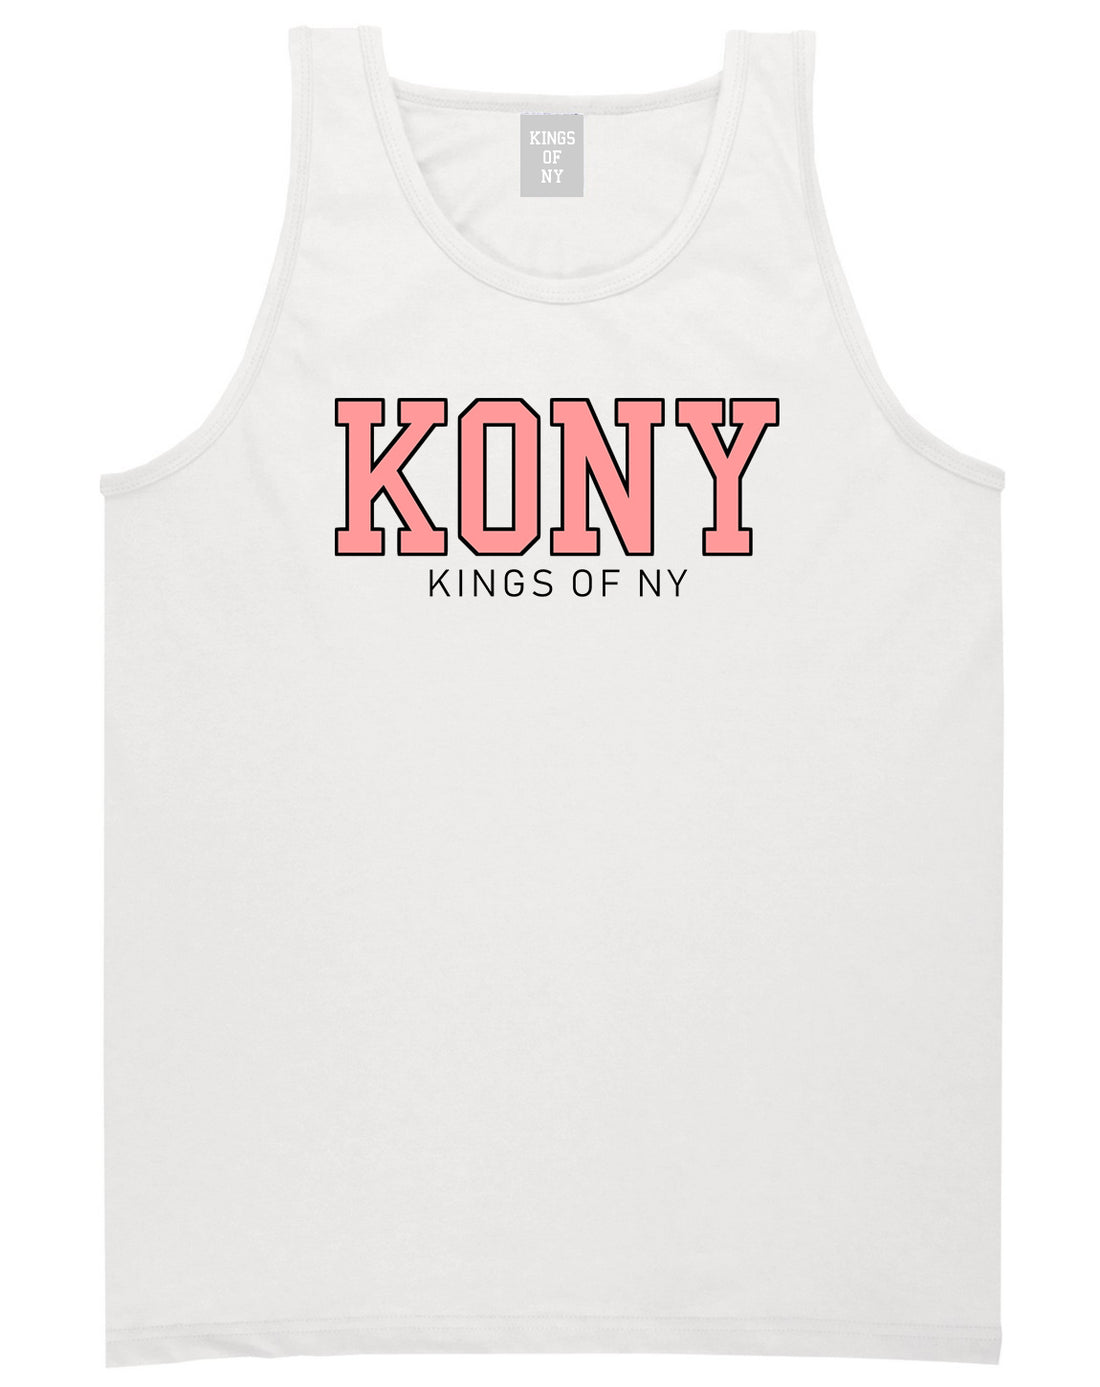 KONY College Mens Tank Top Shirt White by Kings Of NY